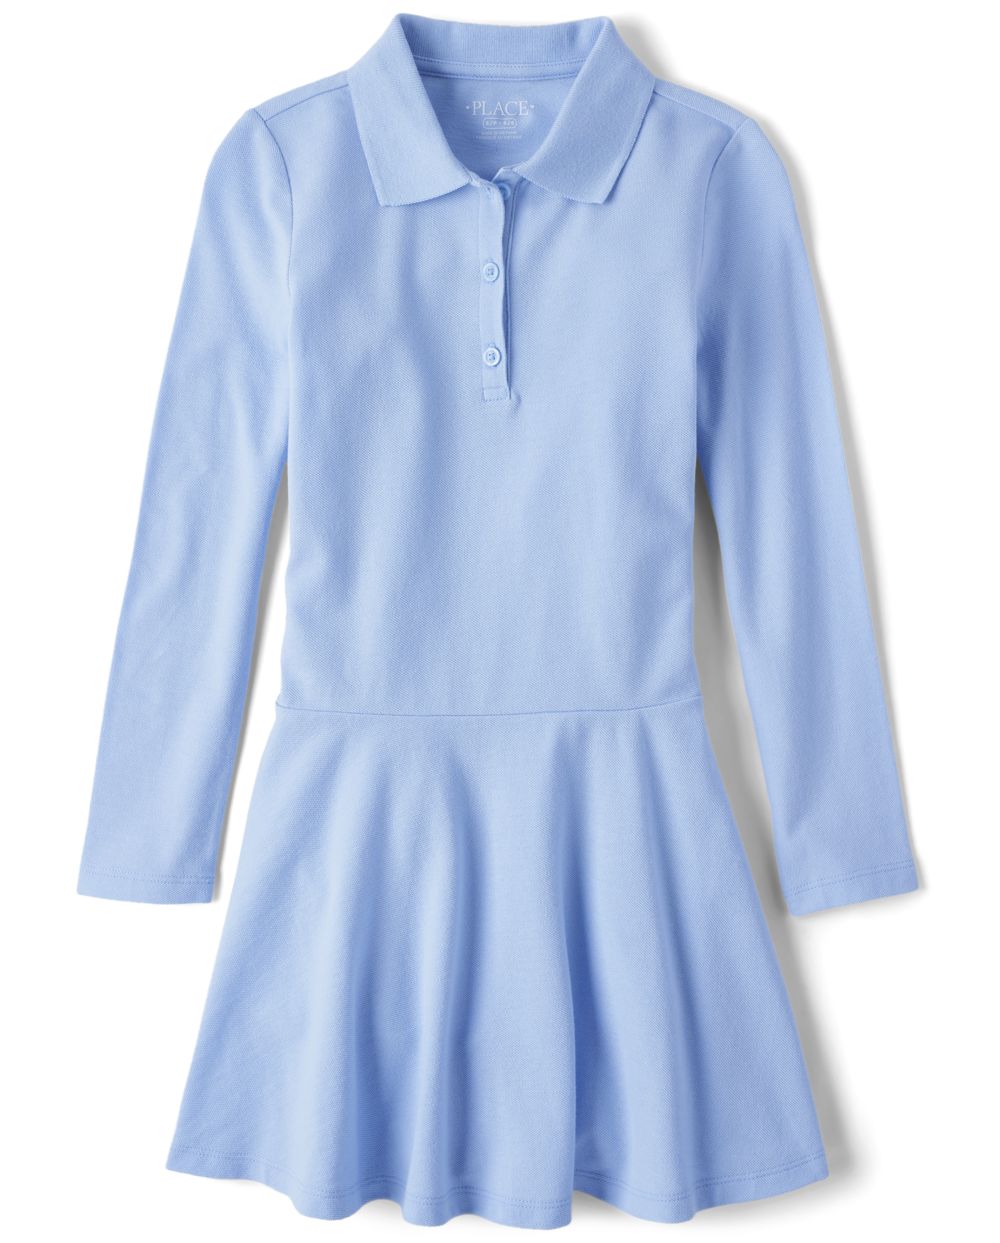 Girls Collared Above the Knee Long Sleeves Button Front Dress